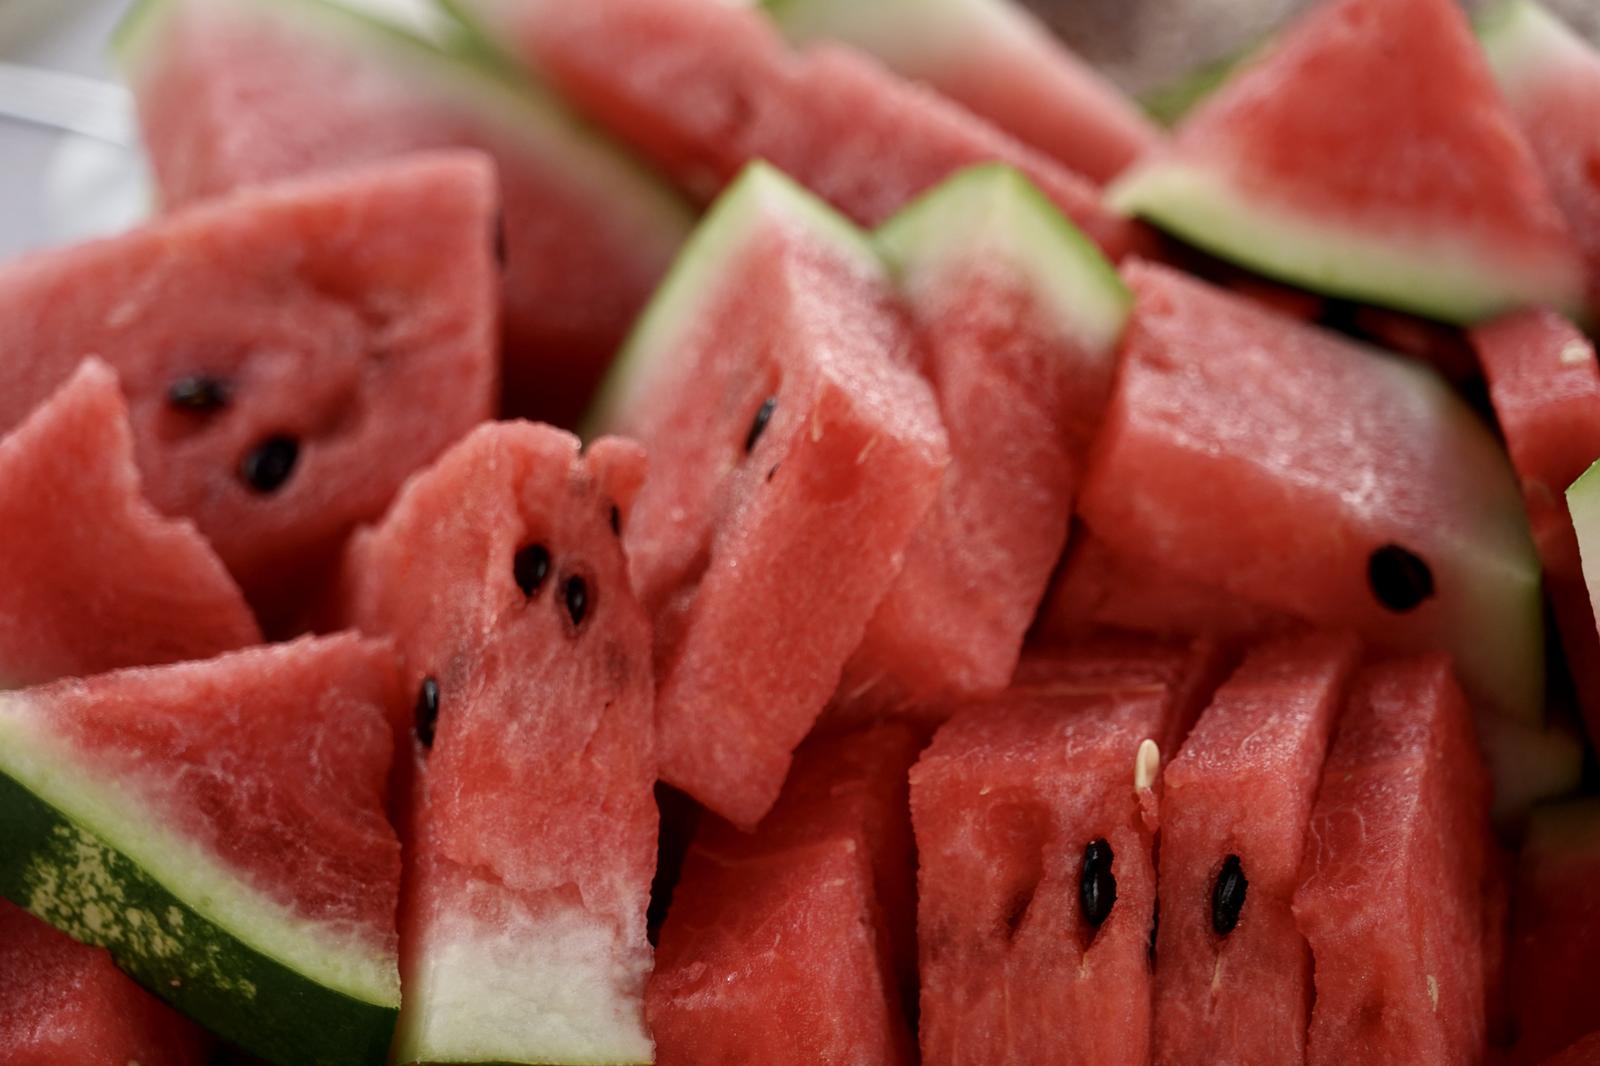 Can You *Actually* Score at Least 83% On This All-Rounded Knowledge Quiz? Watermelon